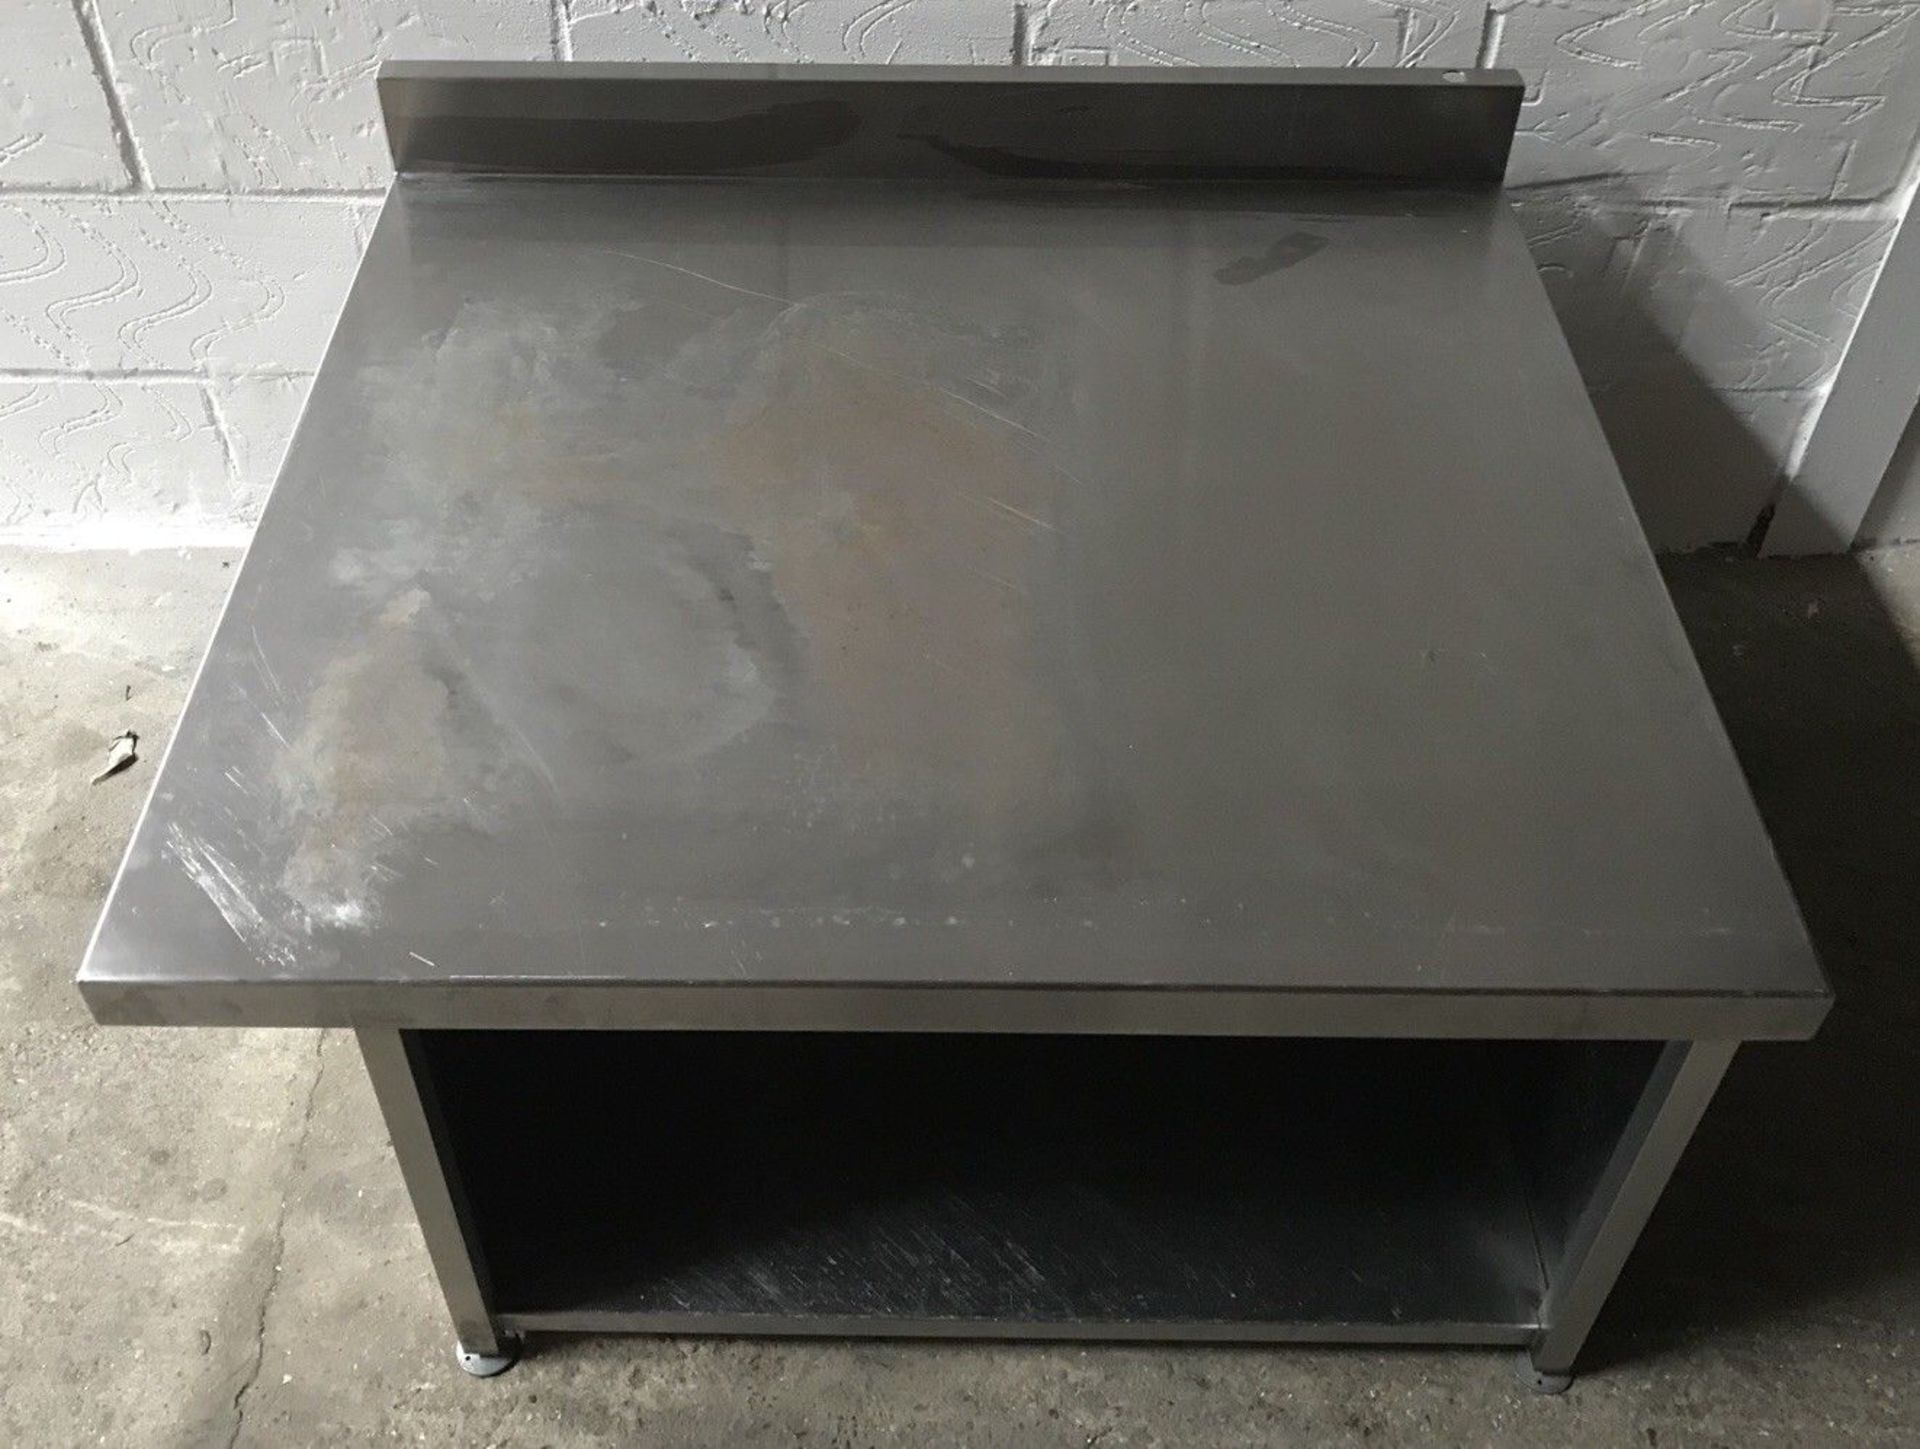 Stainless Steel Oven / Appliance Stand - Image 3 of 5